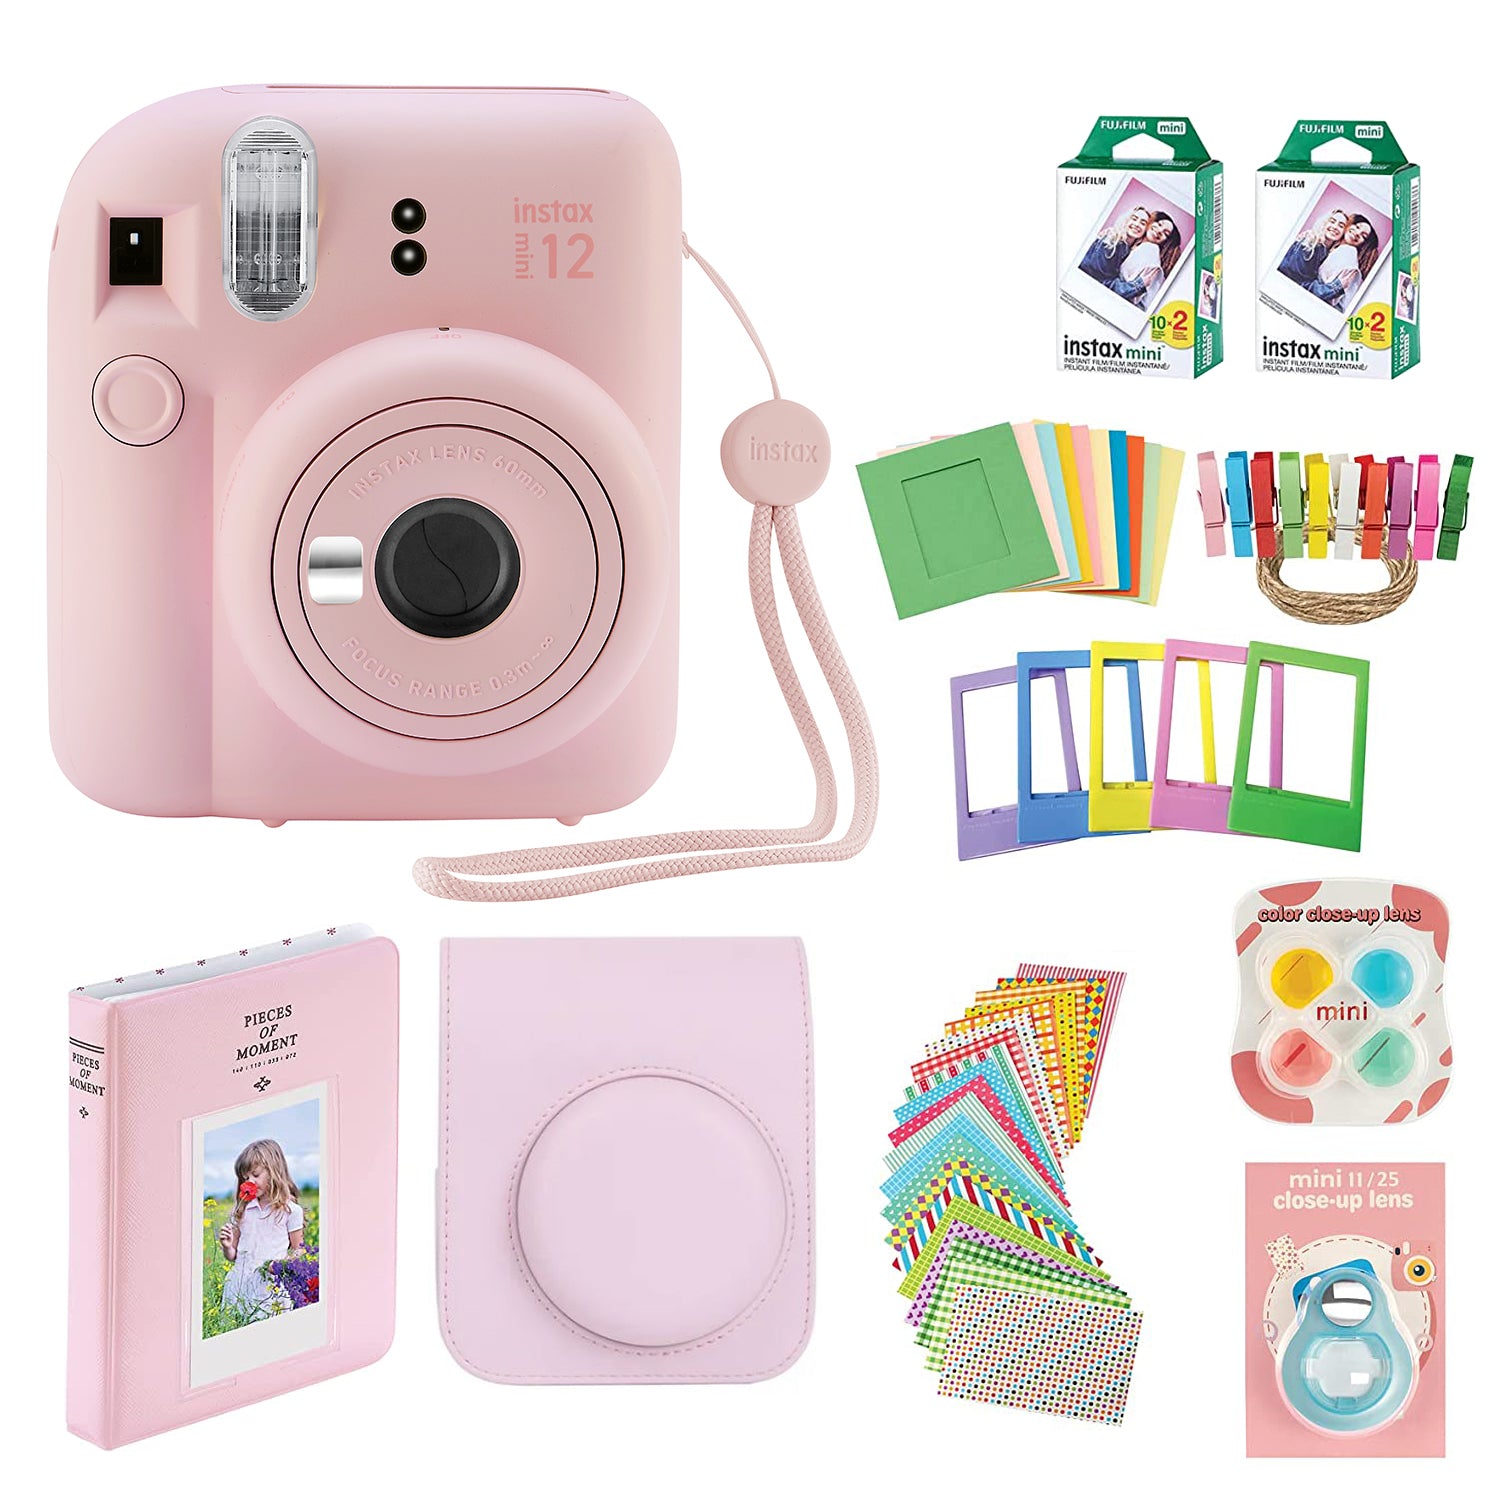 Fujifilm Instax Mini 12 Instant Camera with Case, 40 Fuji Films, Decoration Stickers, Frames, Photo Album and More Accessory kit (Blush Pink)